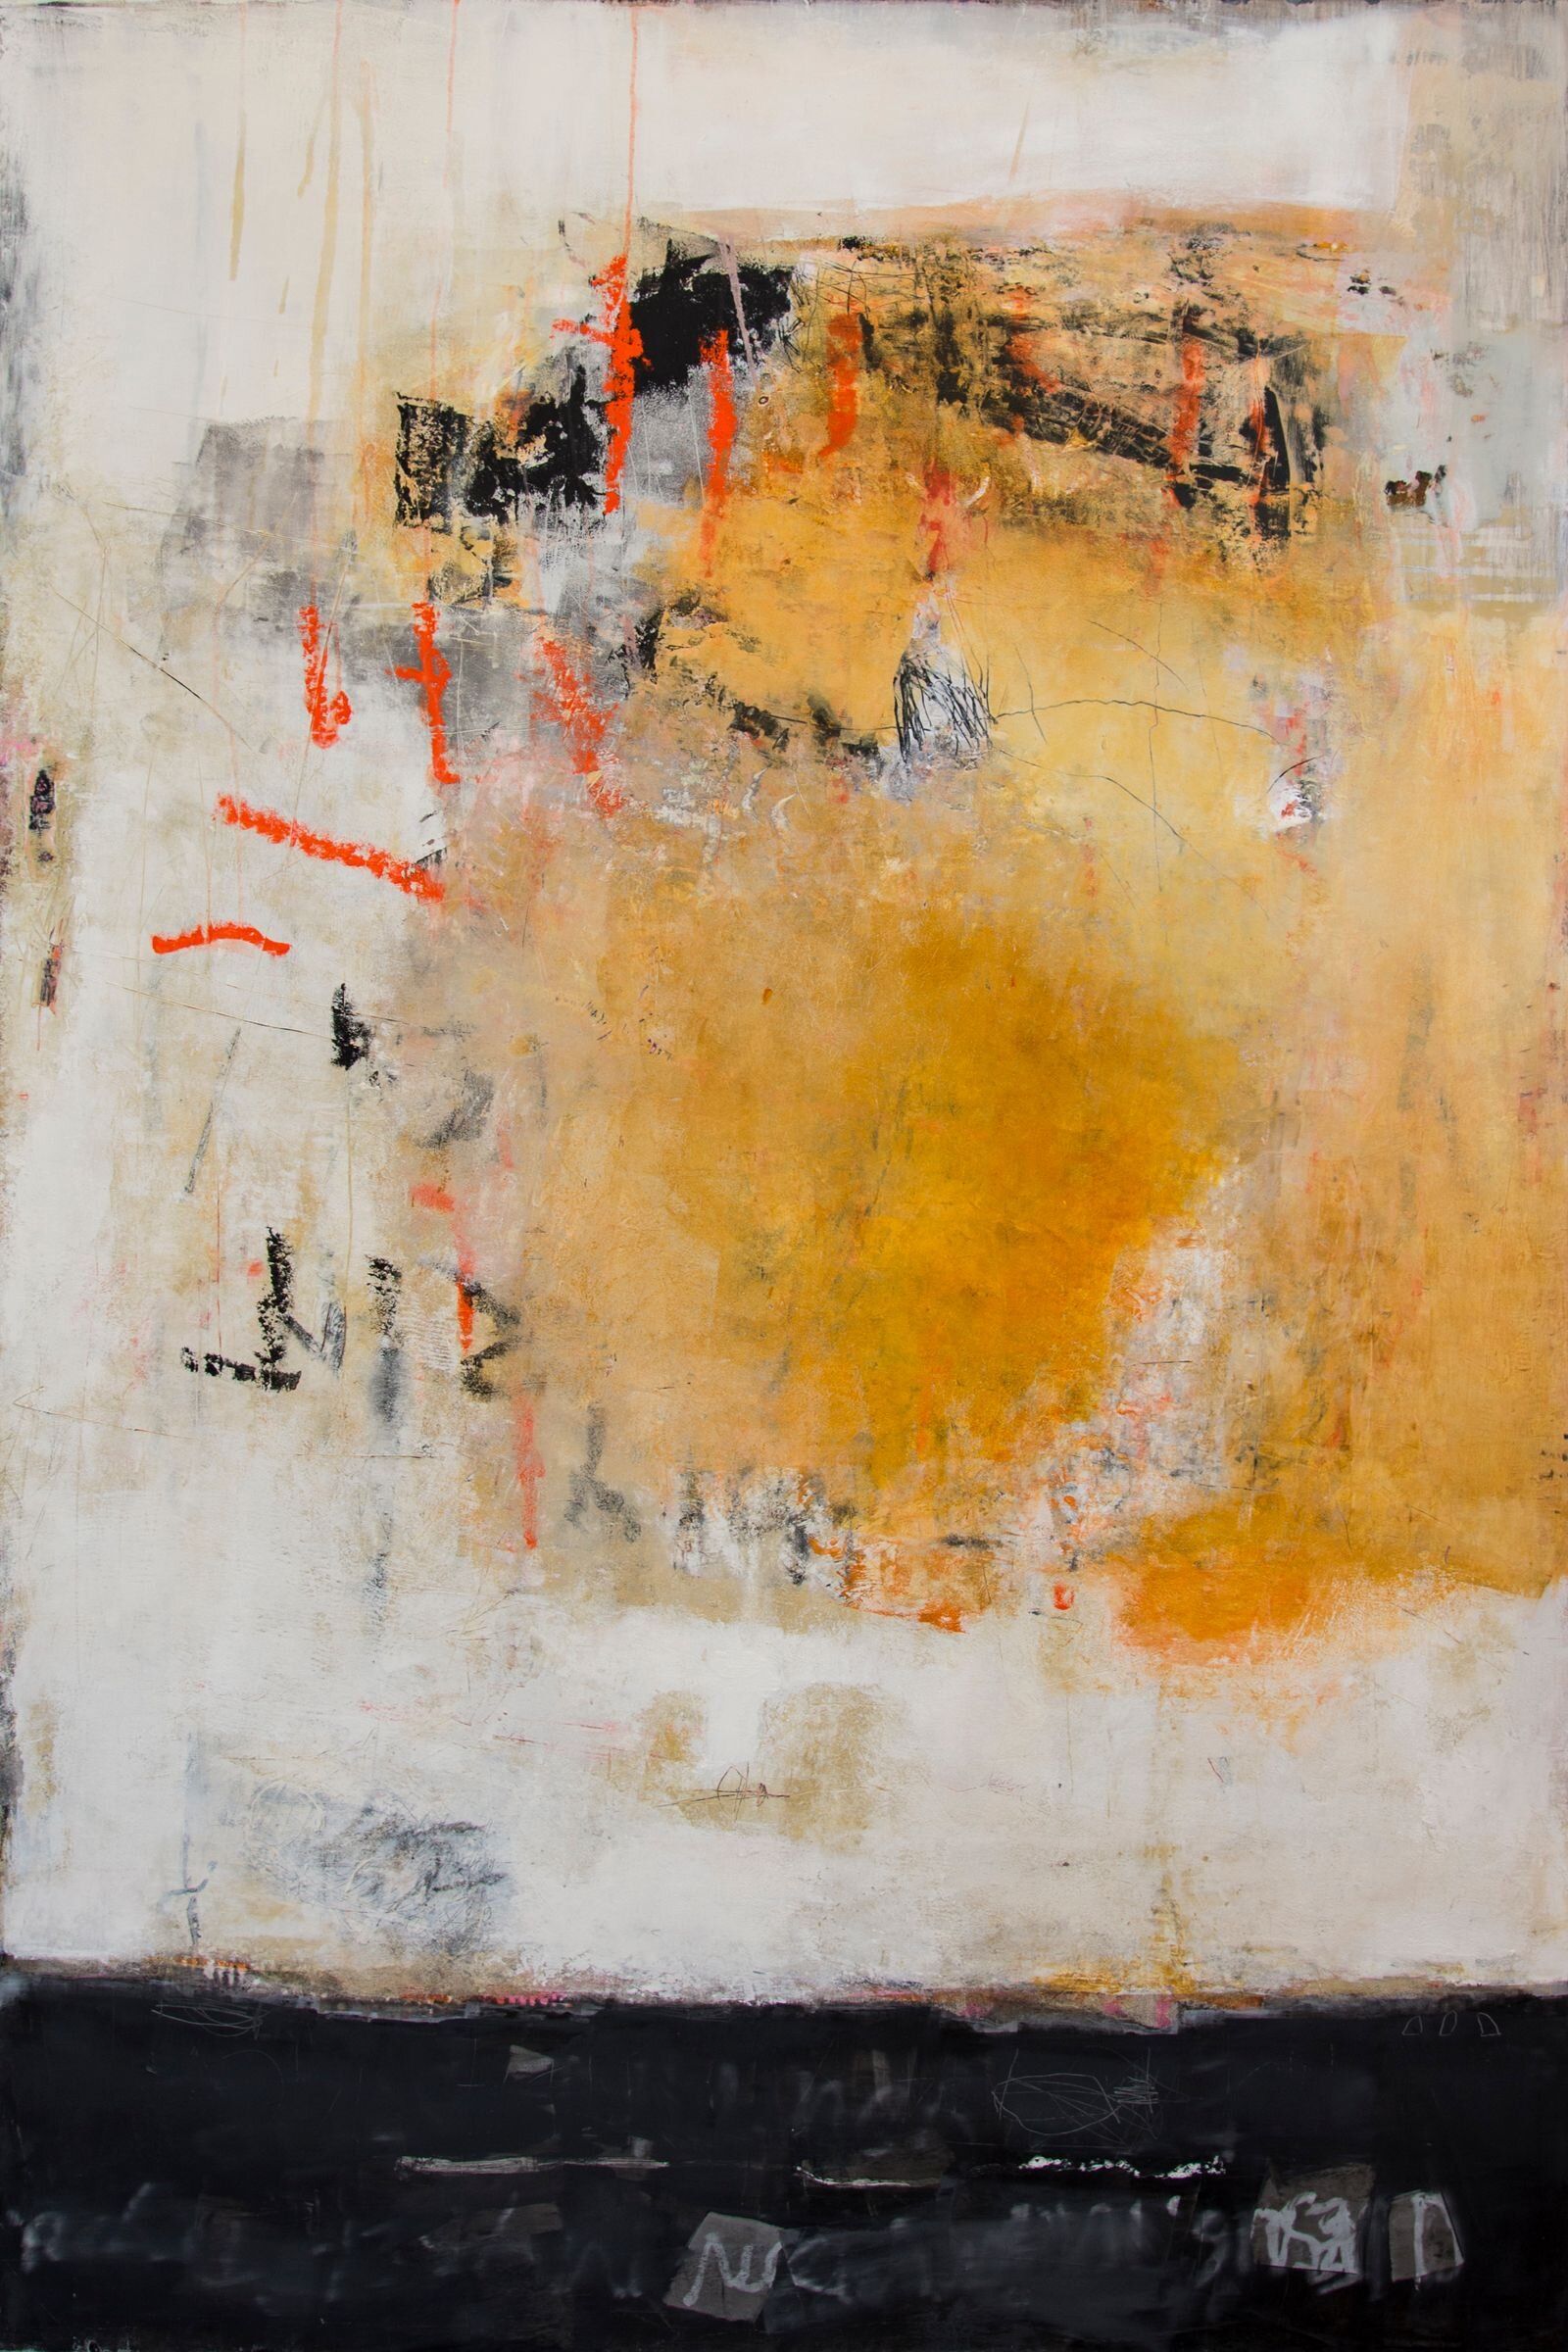 Utterly Exposed  (48" x 72" x 2")